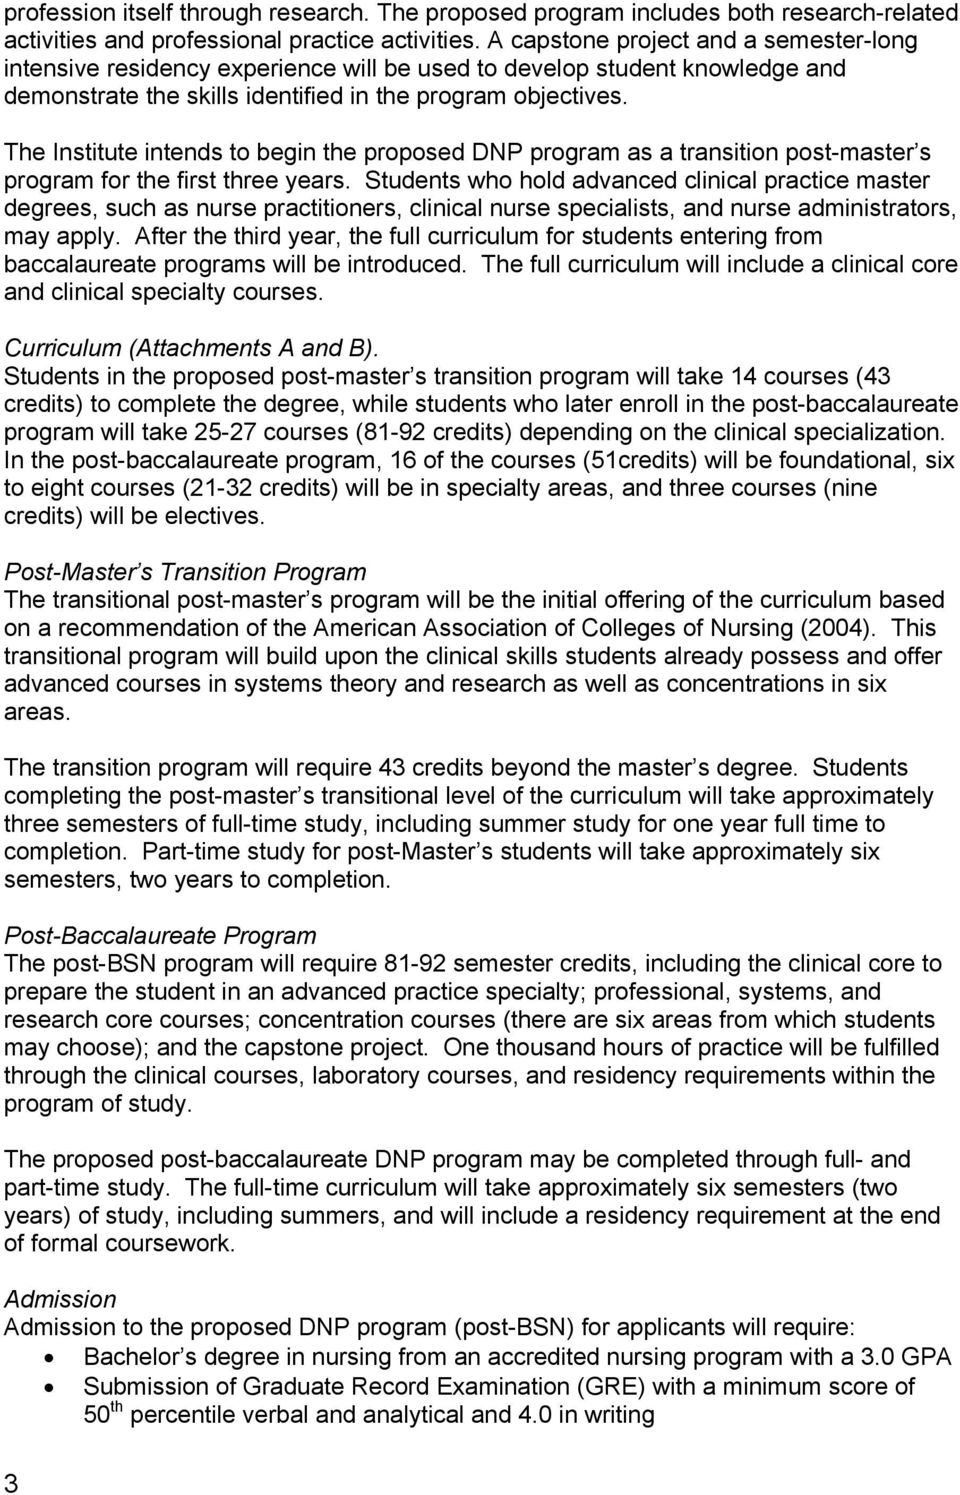 The Institute intends to begin the proposed D program as a transition post-master s program for the first three years.